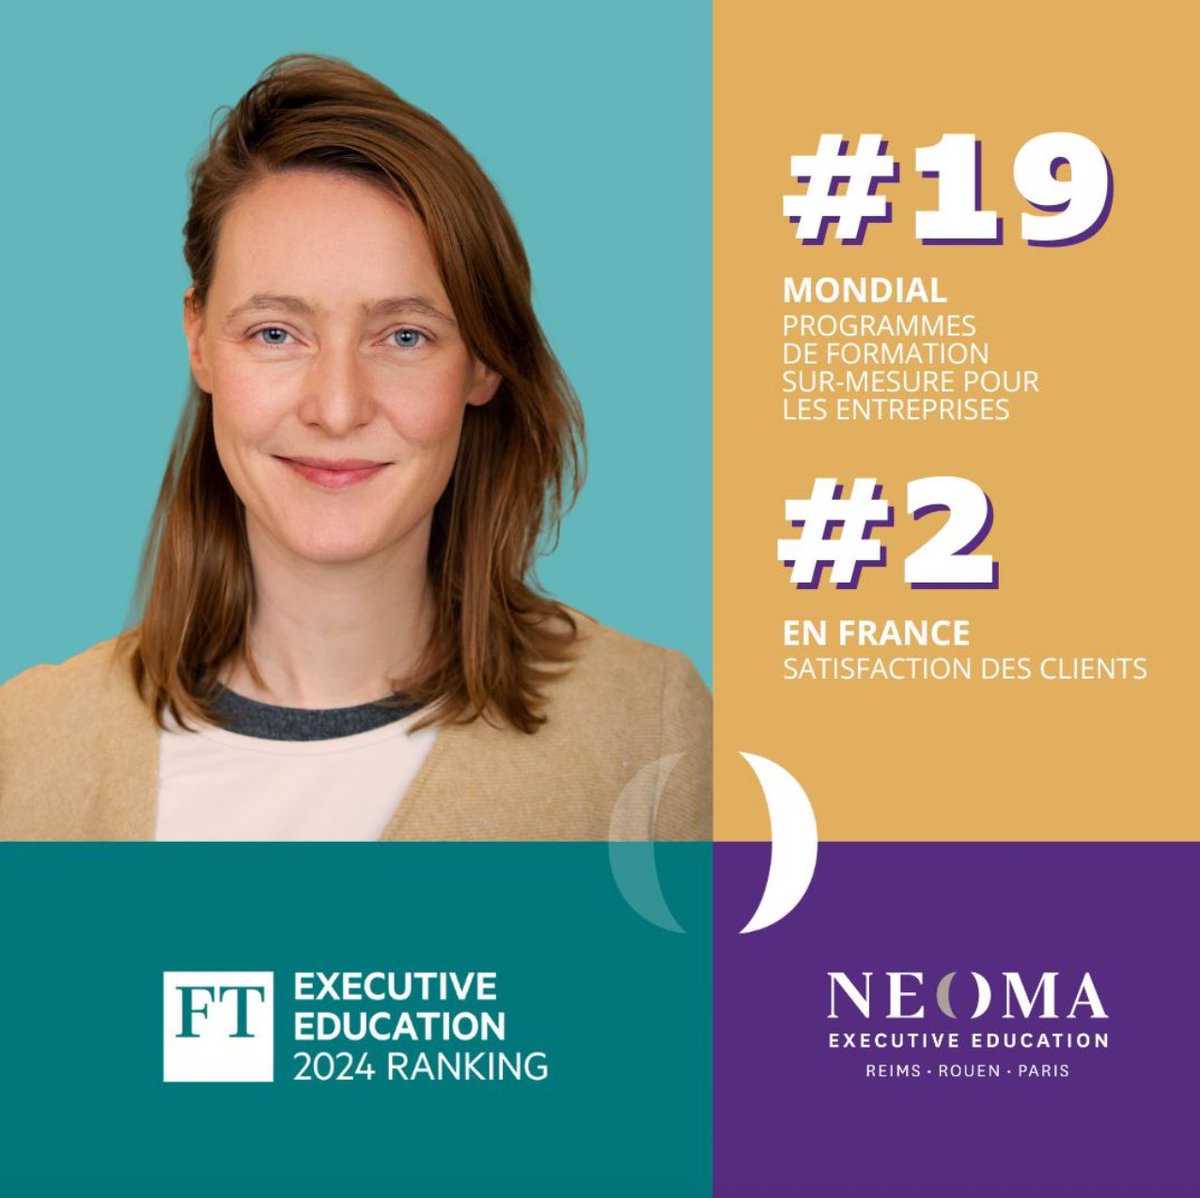 Thrilled about the new @FinancialTimes Executive Education ranking where  @NEOMAbs is #19 worldwide for custom programmes (progression of 17) and enters for the first time in the open programmes ranking at #37. Especially happy with our great level of client satisfaction!